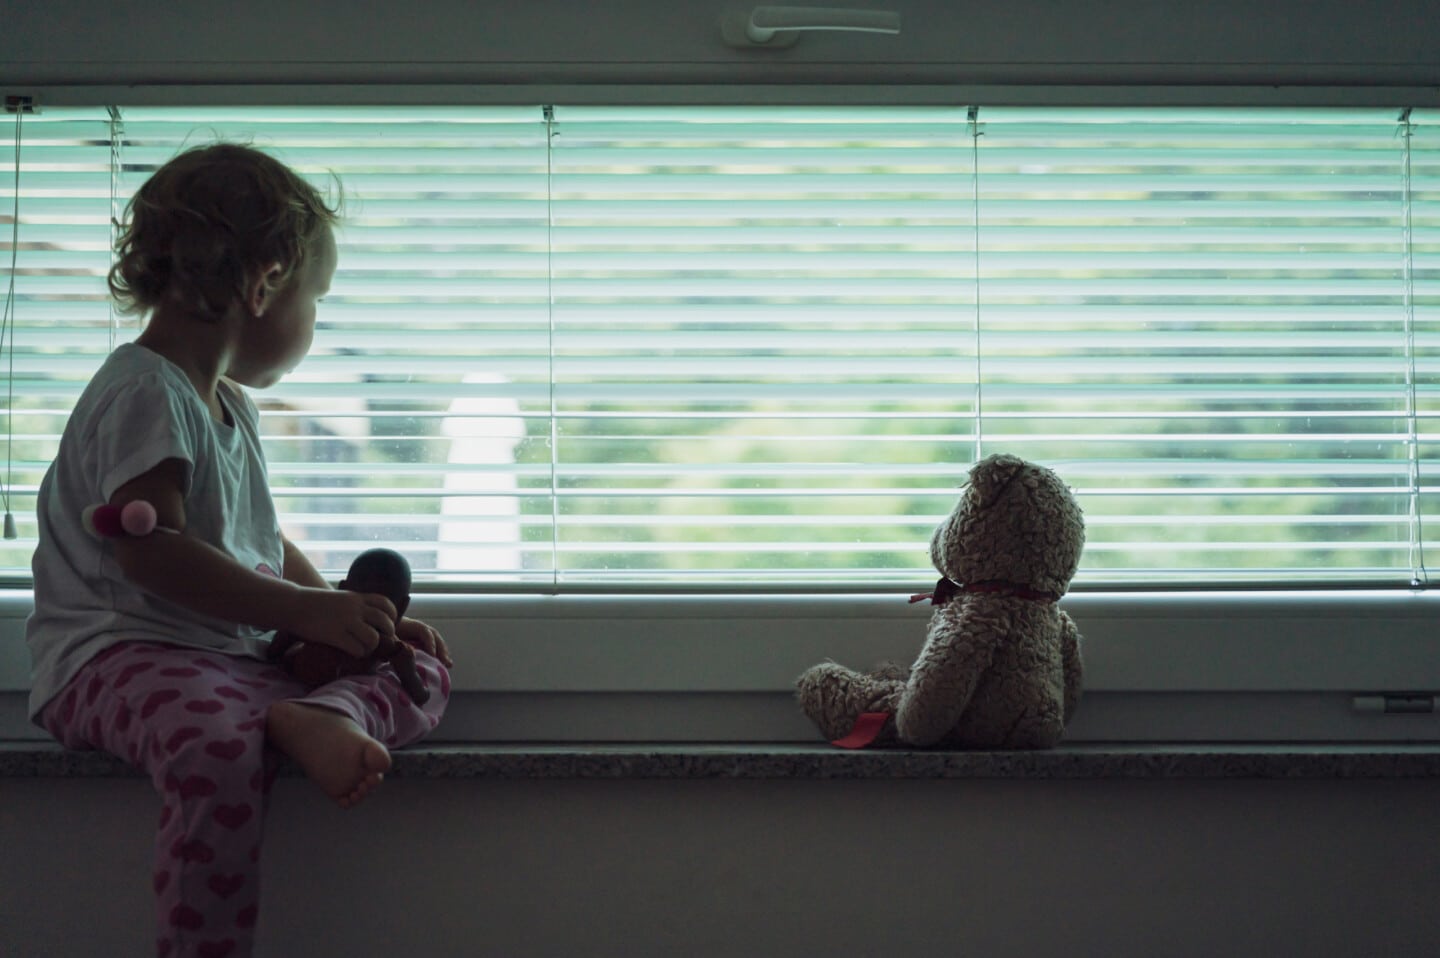 Toddler girl sitting on window shelf  with her teddy bear looking out the window with blinds on it. Conceptual image of child abuse and abandonment.